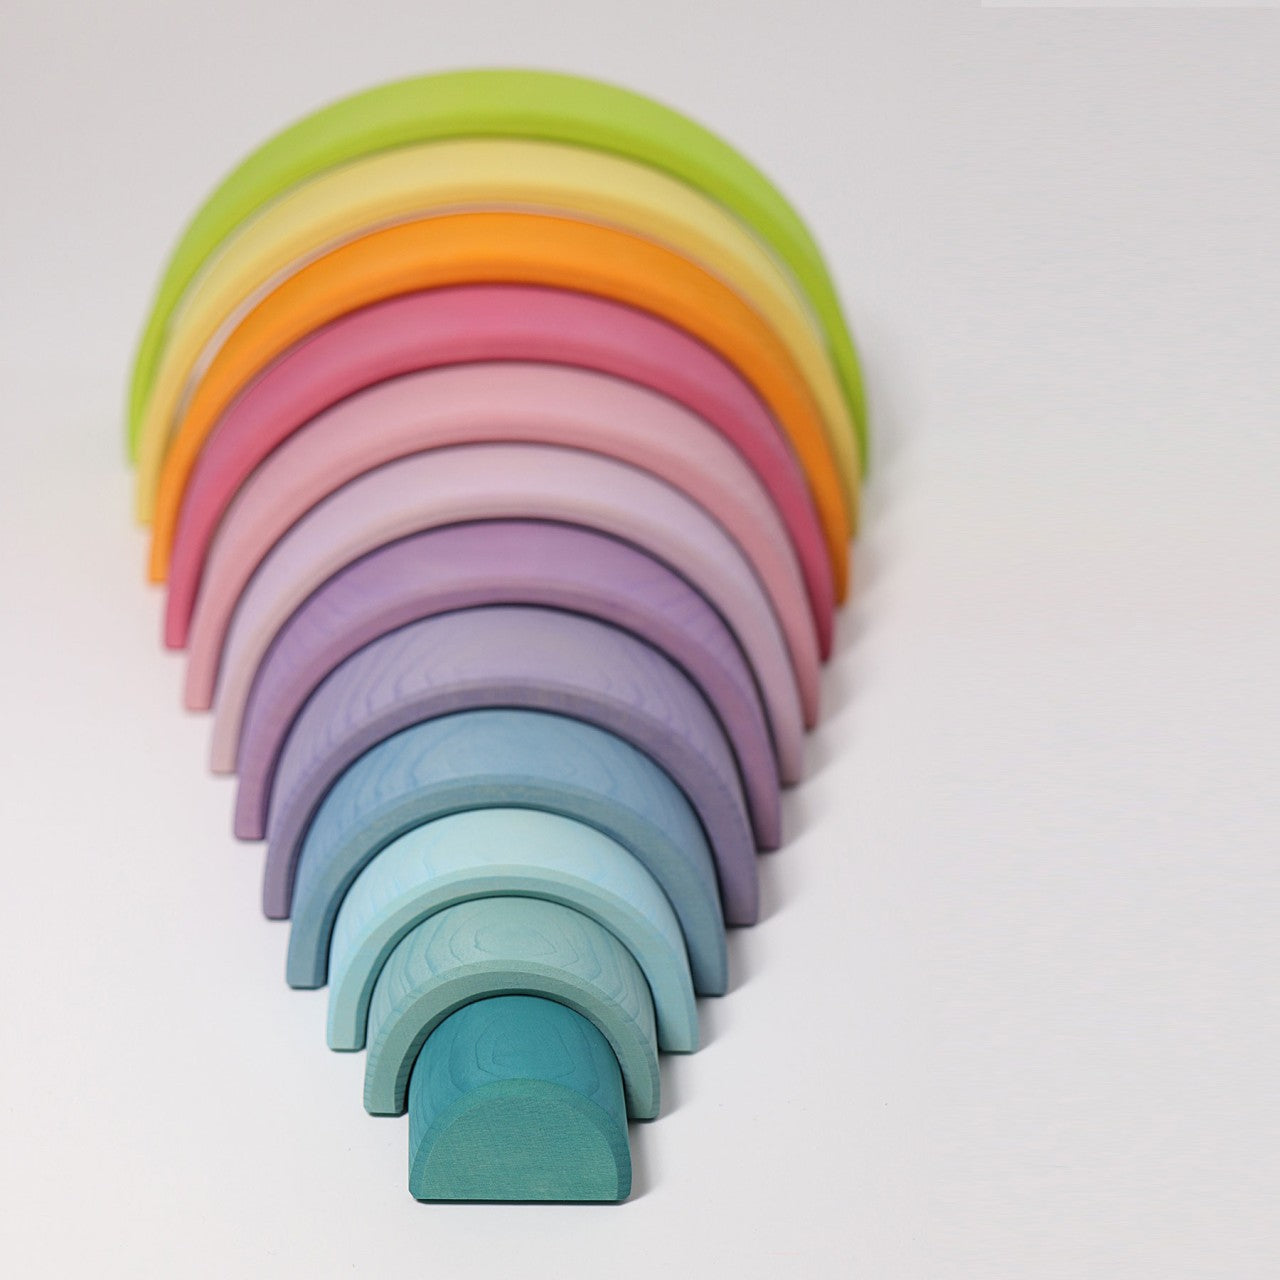 Large Pastel Rainbow | 12 Pieces | Wooden Toys for Kids | Open-Ended Play